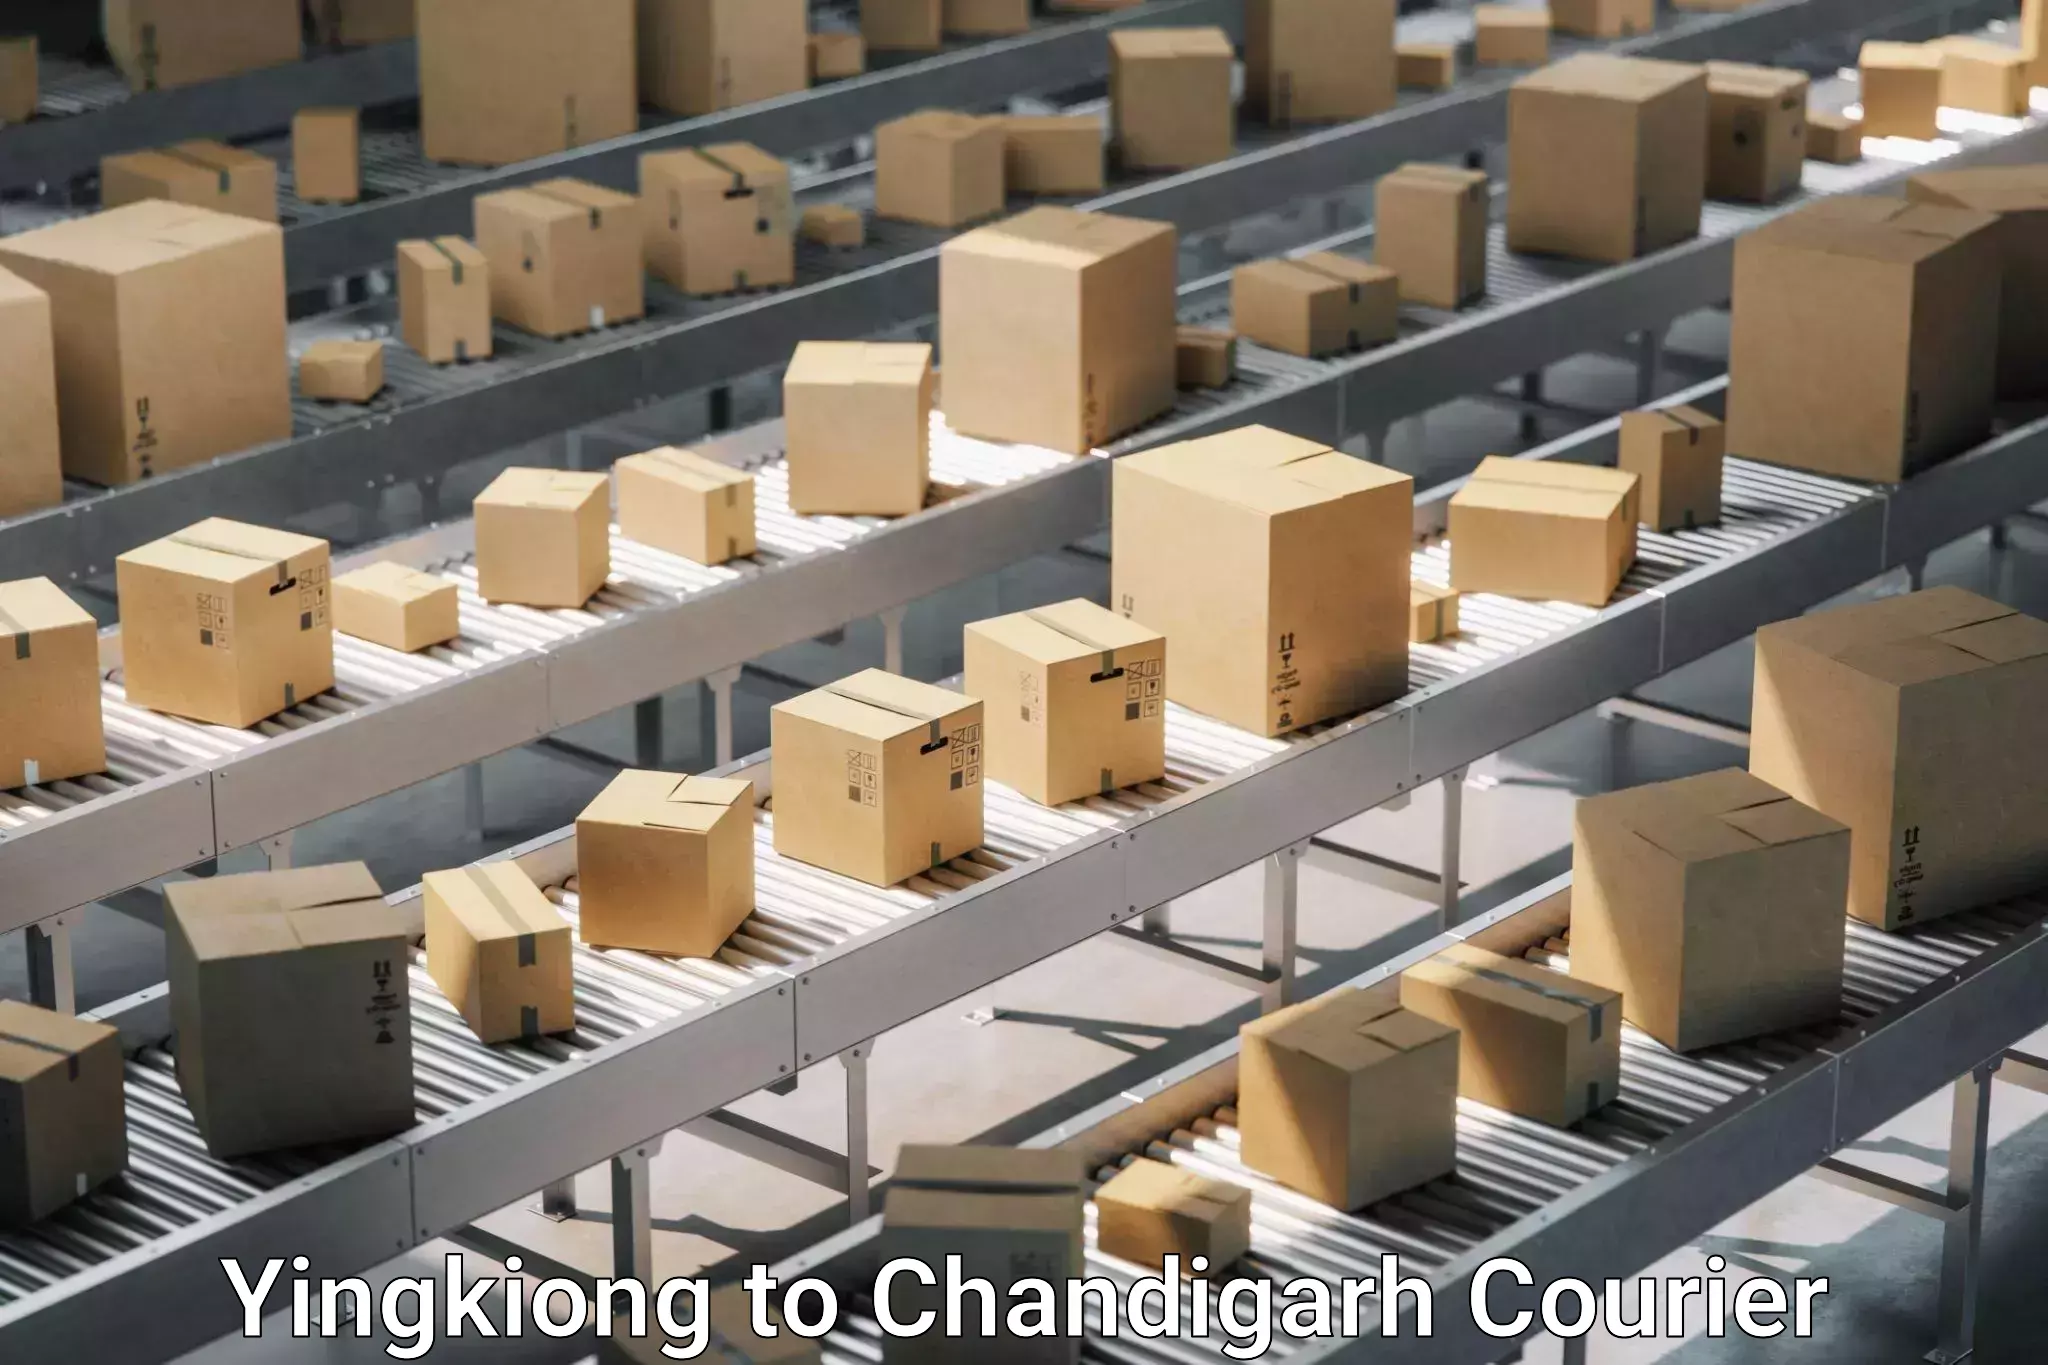 Residential moving experts Yingkiong to Chandigarh